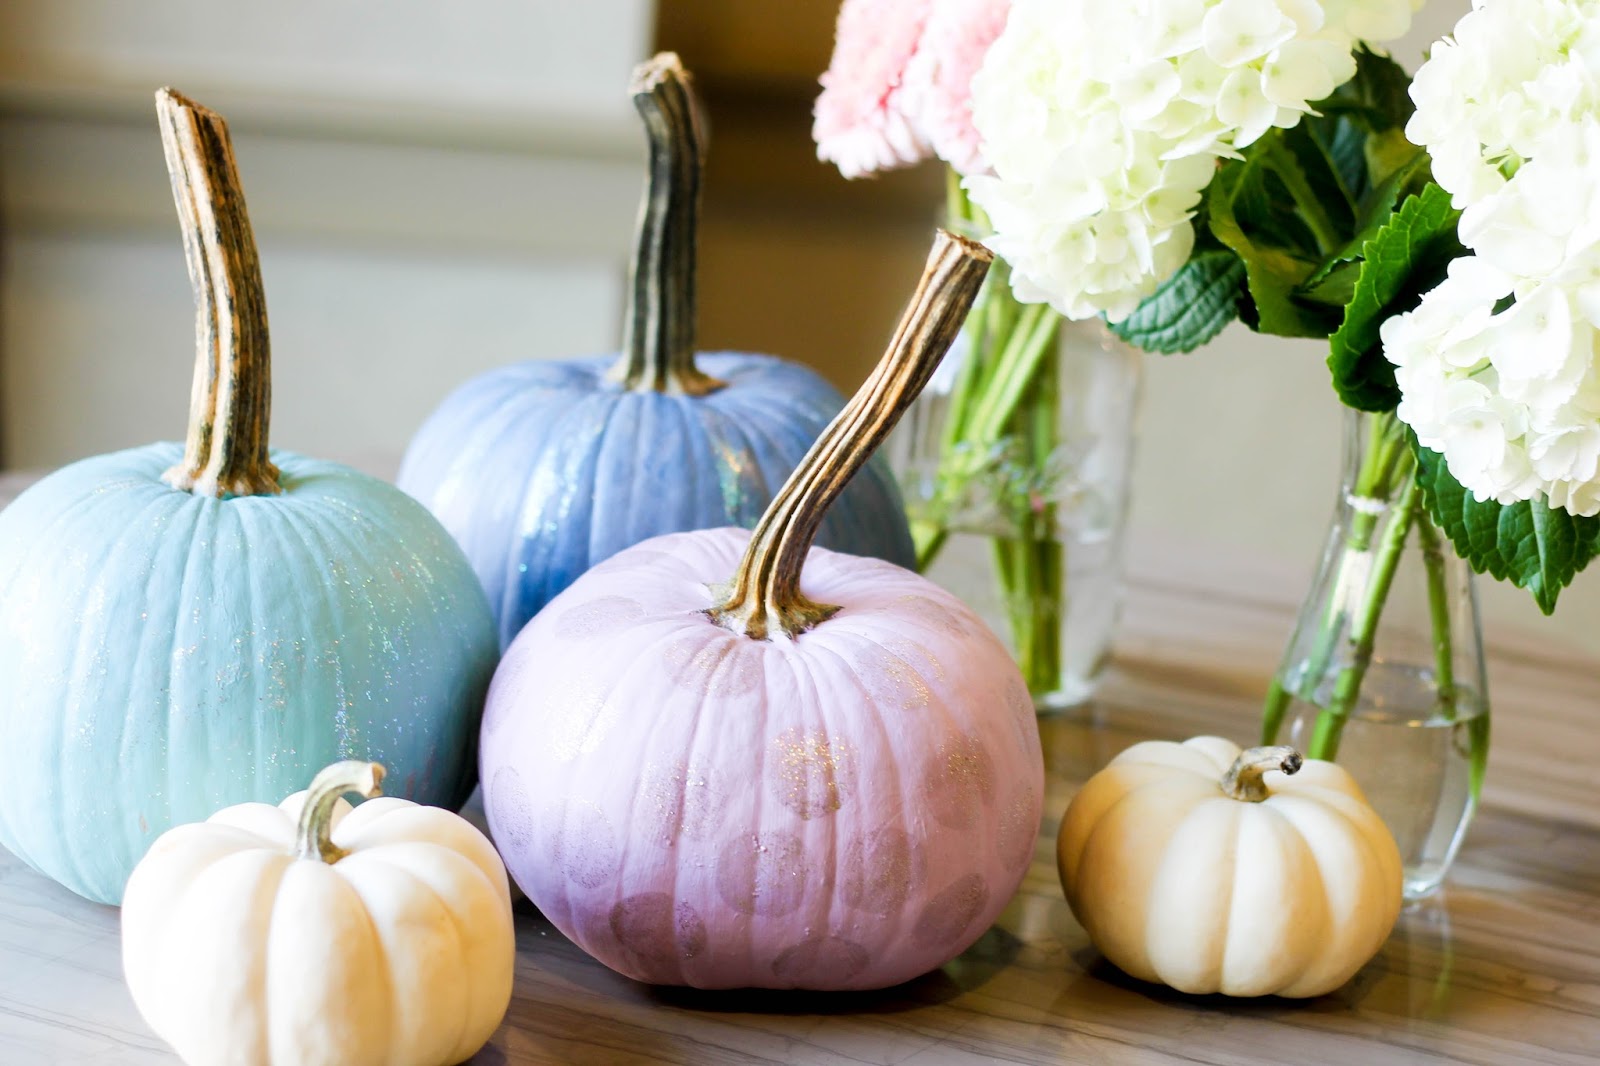 chalk paint on pumpkins, painting pumpkins with chalk paint, annie sloan chalk paint on pumpkins, fall party, hosting a fall brunch party, pumpkin painting party ideas, fall party ideas, mr. clean concentrated cleaner, pretty in the pines blog, raleigh, north carolina